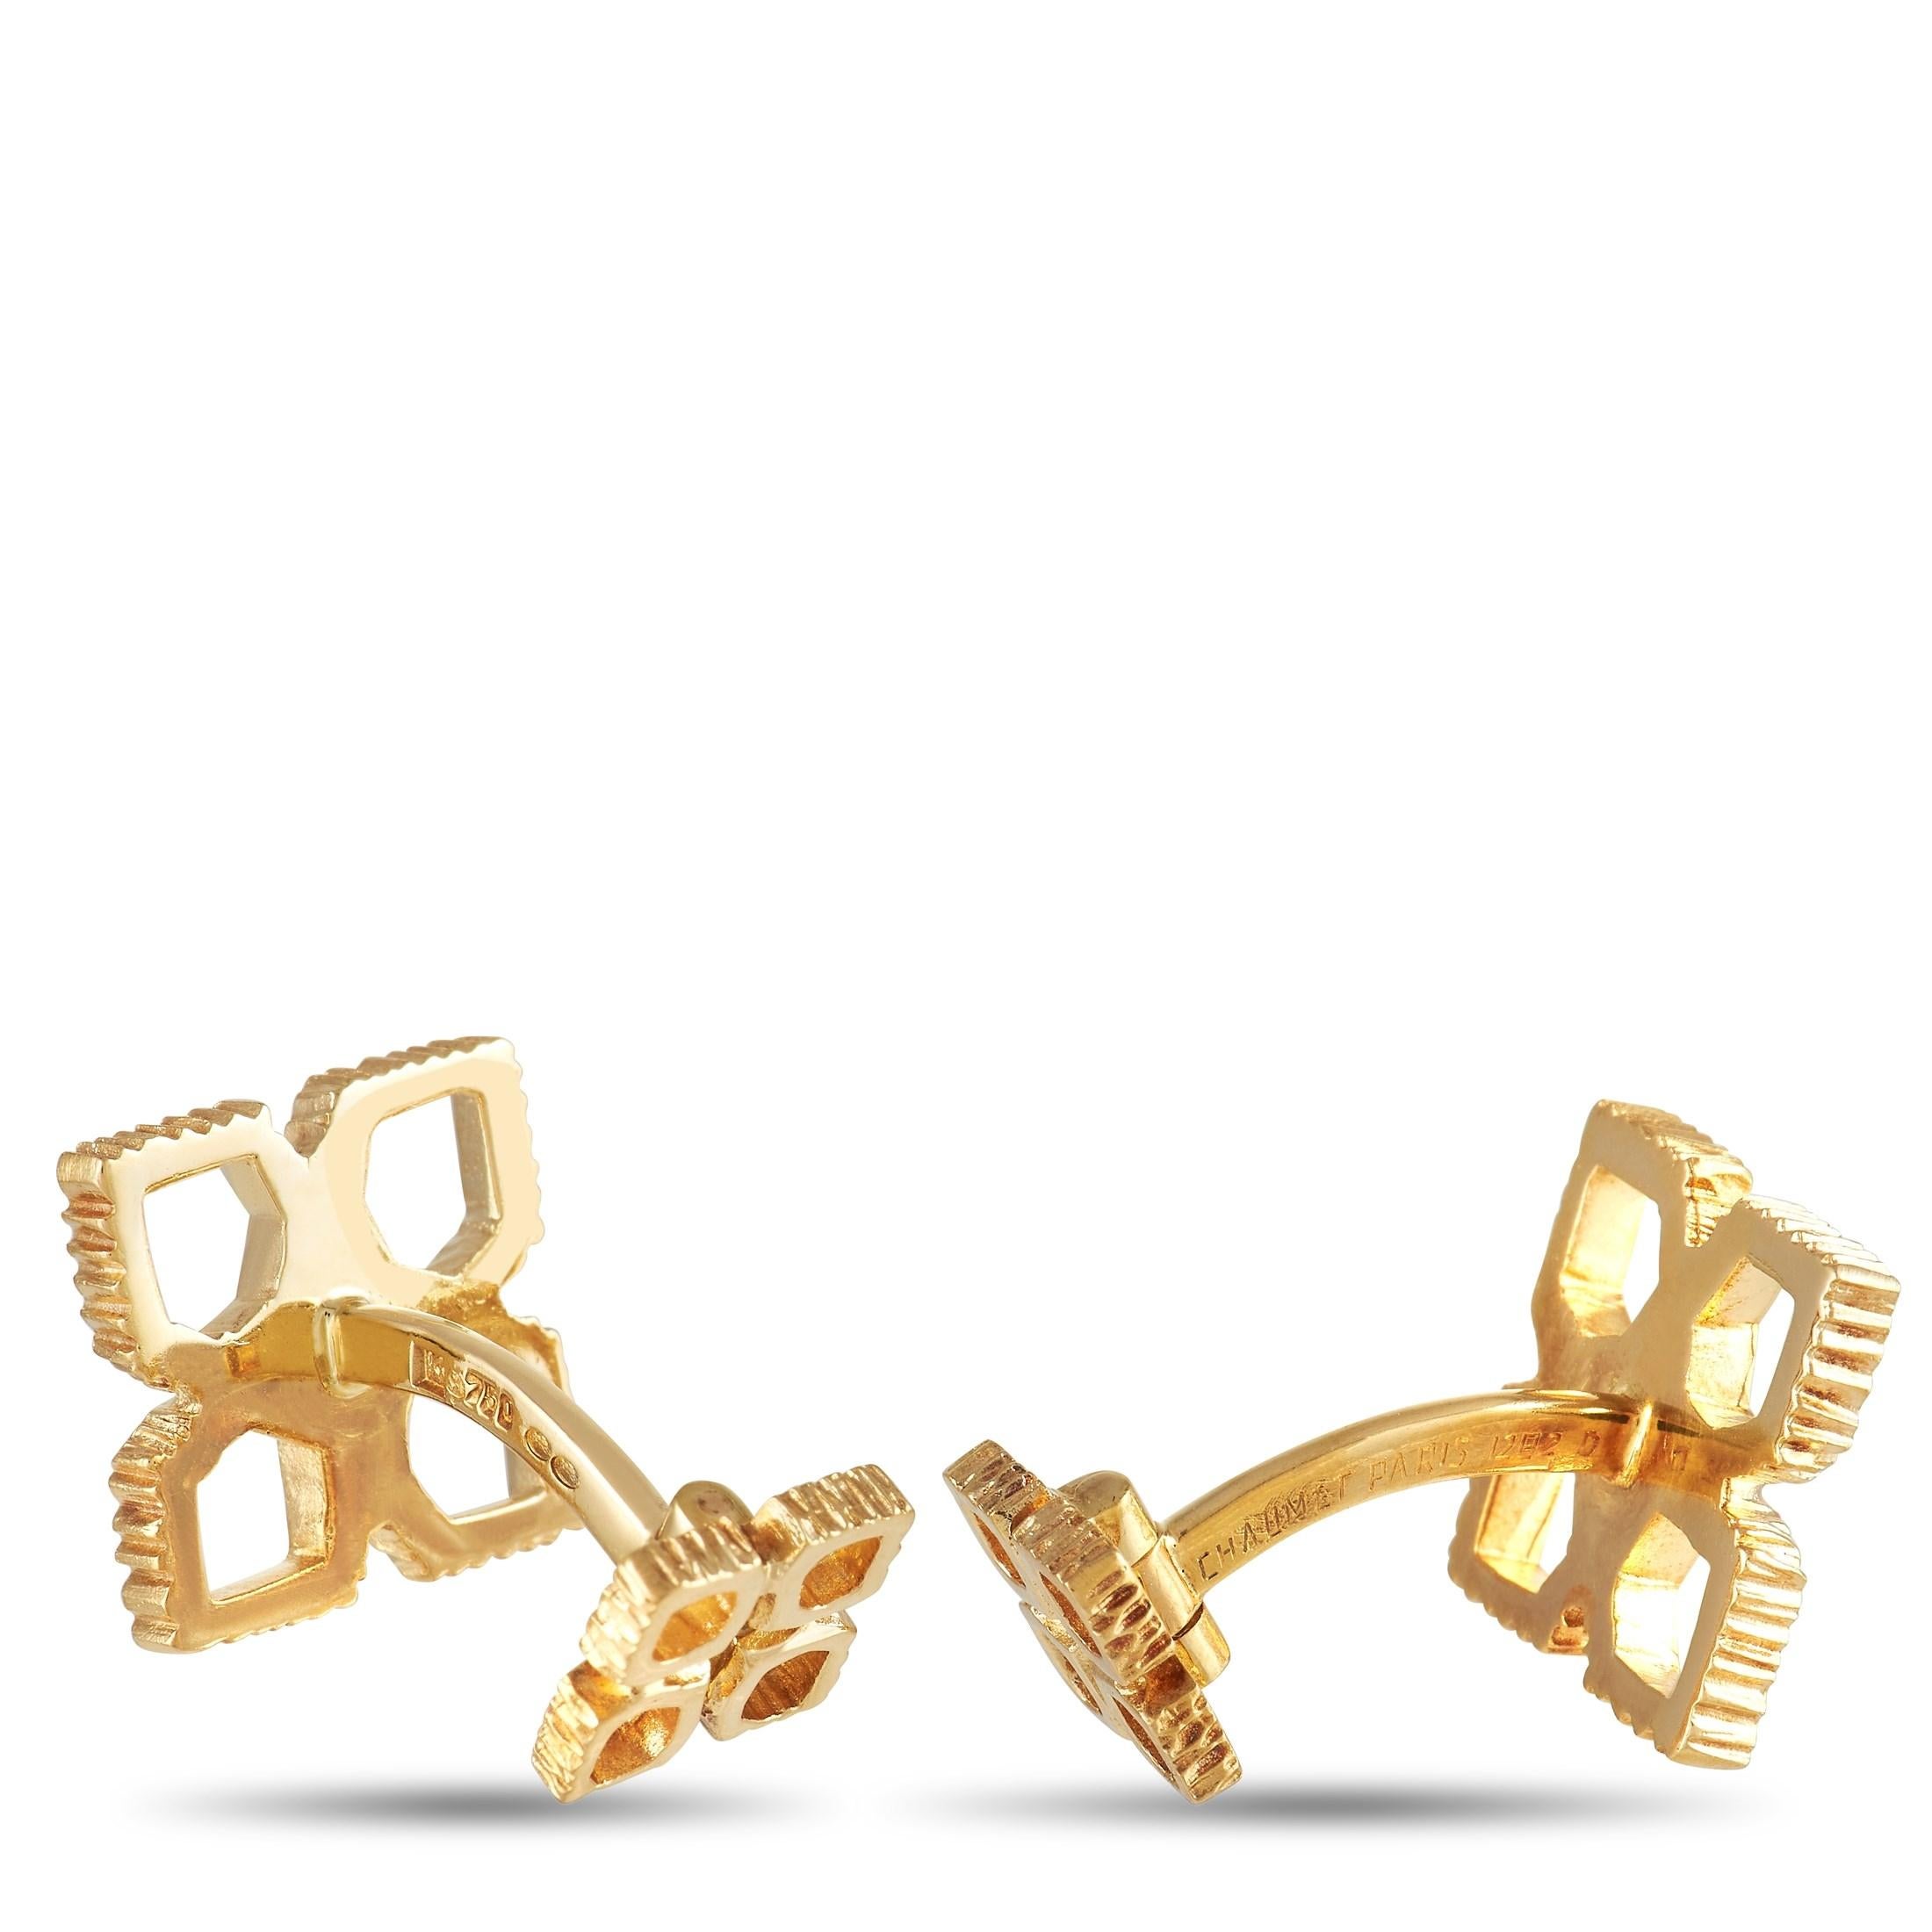 Fasten a shirt in style with this pair of cufflinks from Chaumet. It features a square silhouette of four asymmetrical hexagons fashioned in 18K yellow gold. The top surfaces come in a smooth, polished finish while the side edges are heavily ridged.